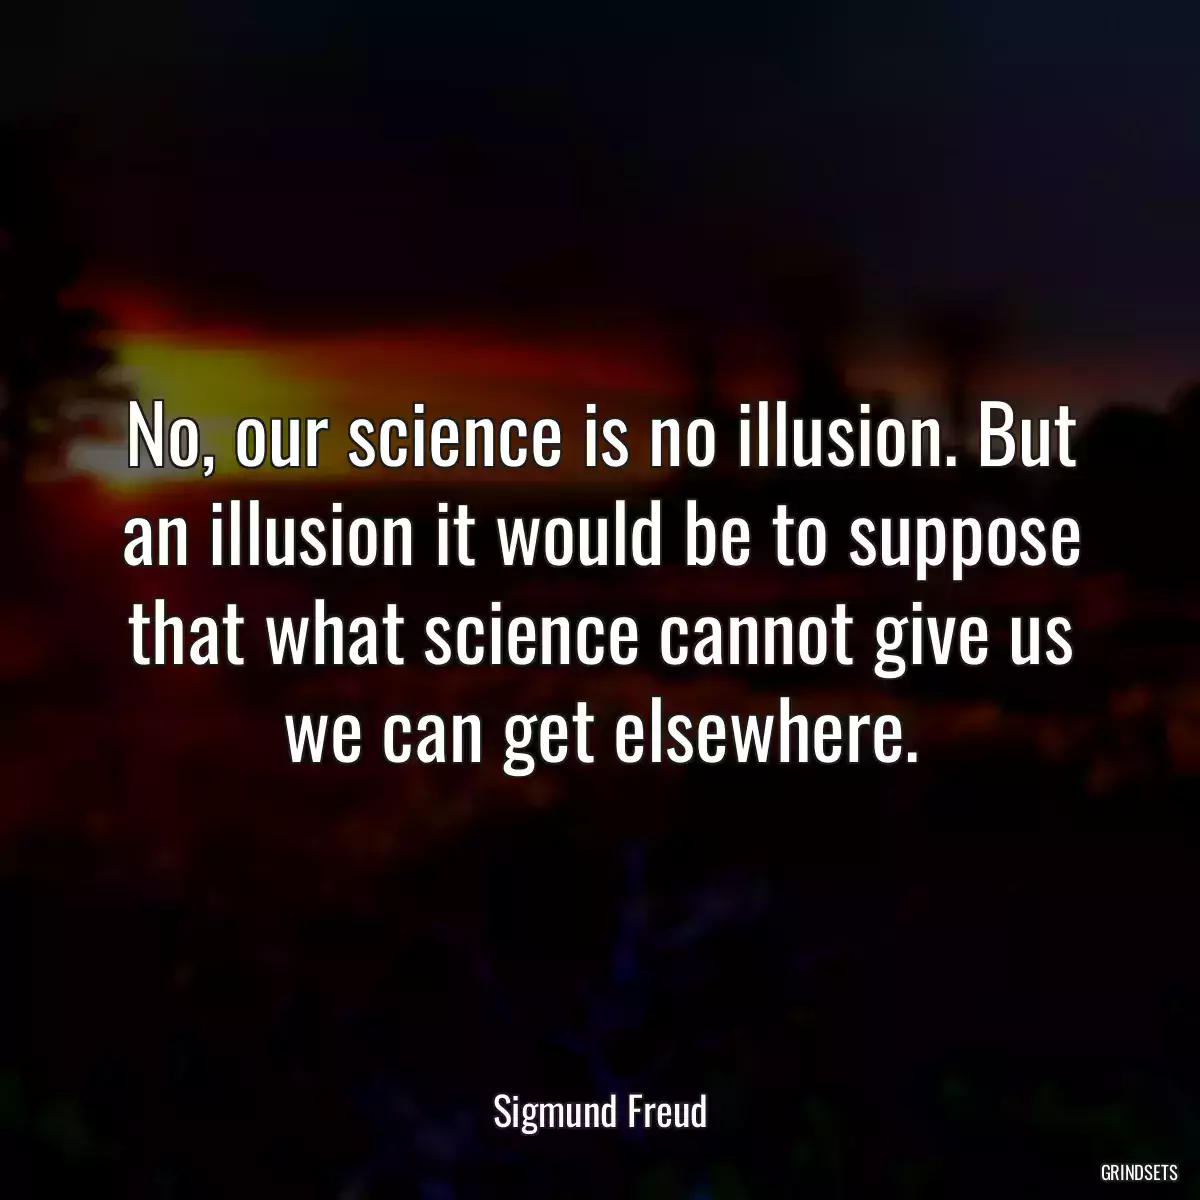 No, our science is no illusion. But an illusion it would be to suppose that what science cannot give us we can get elsewhere.